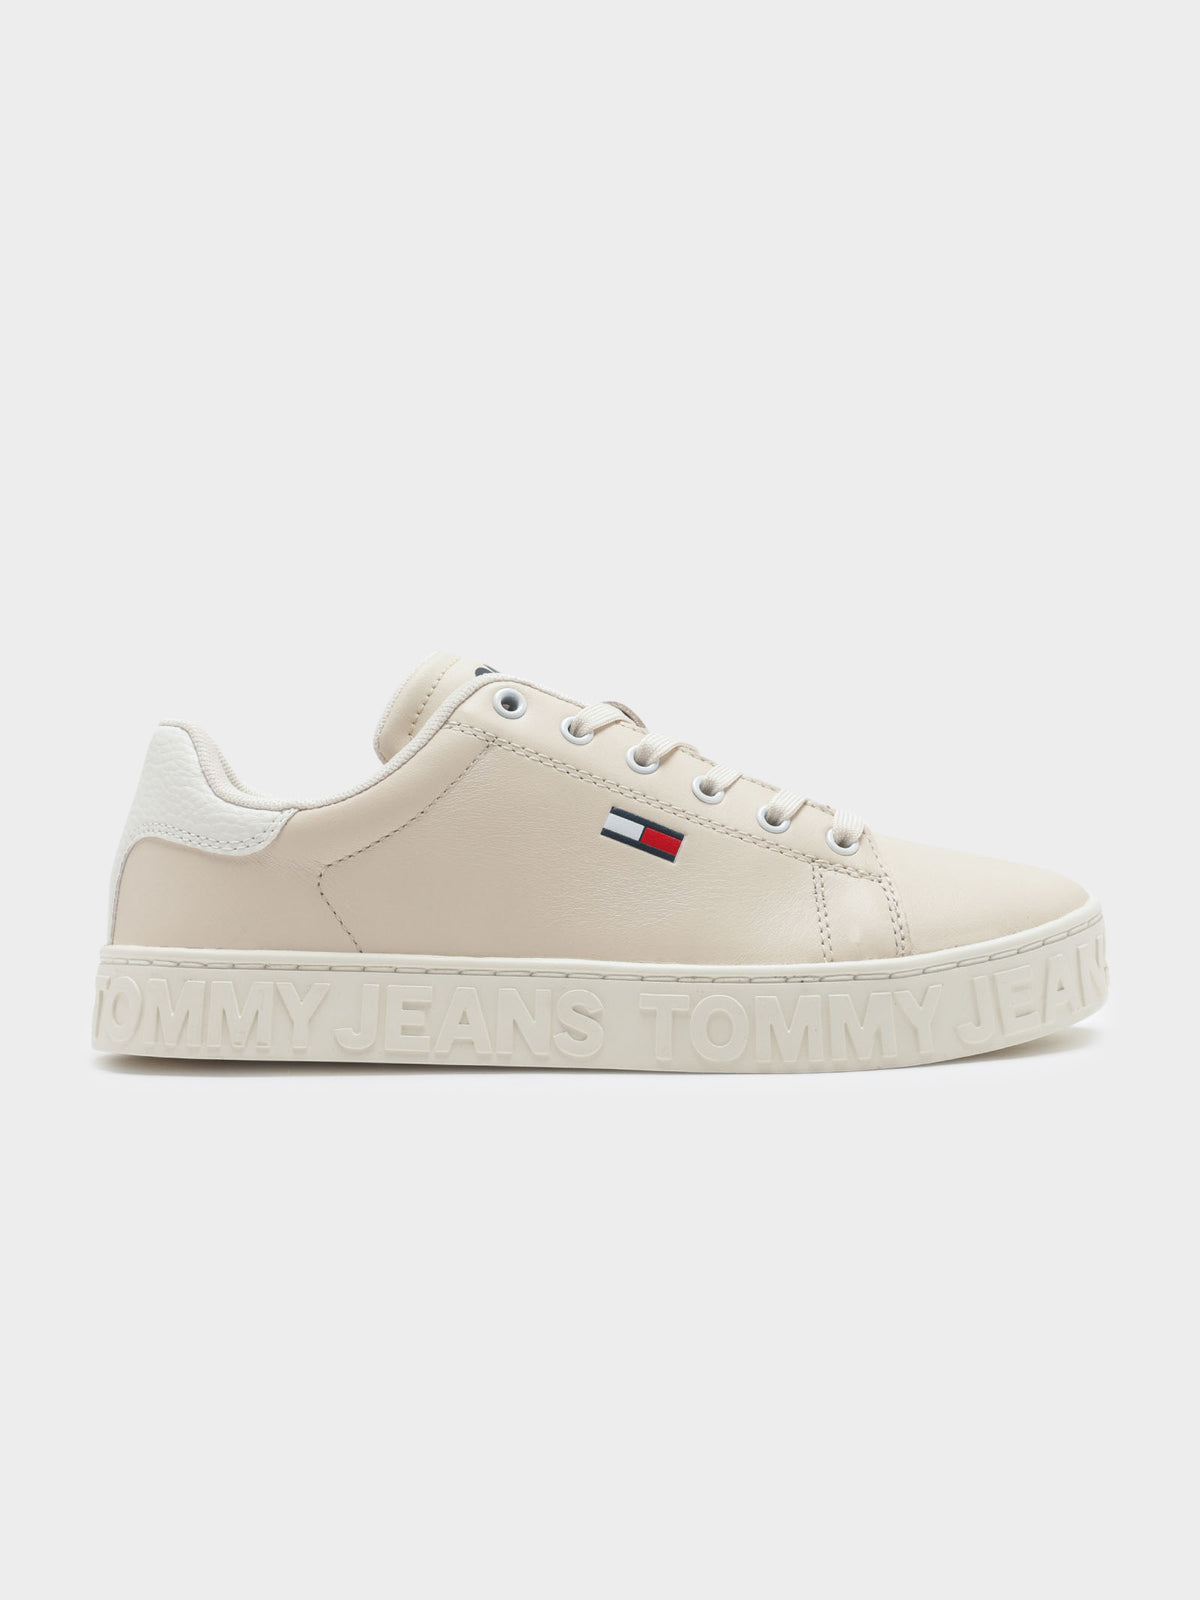 Womens Logo Leather Cupsole Sneakers in Sugarcane Beige